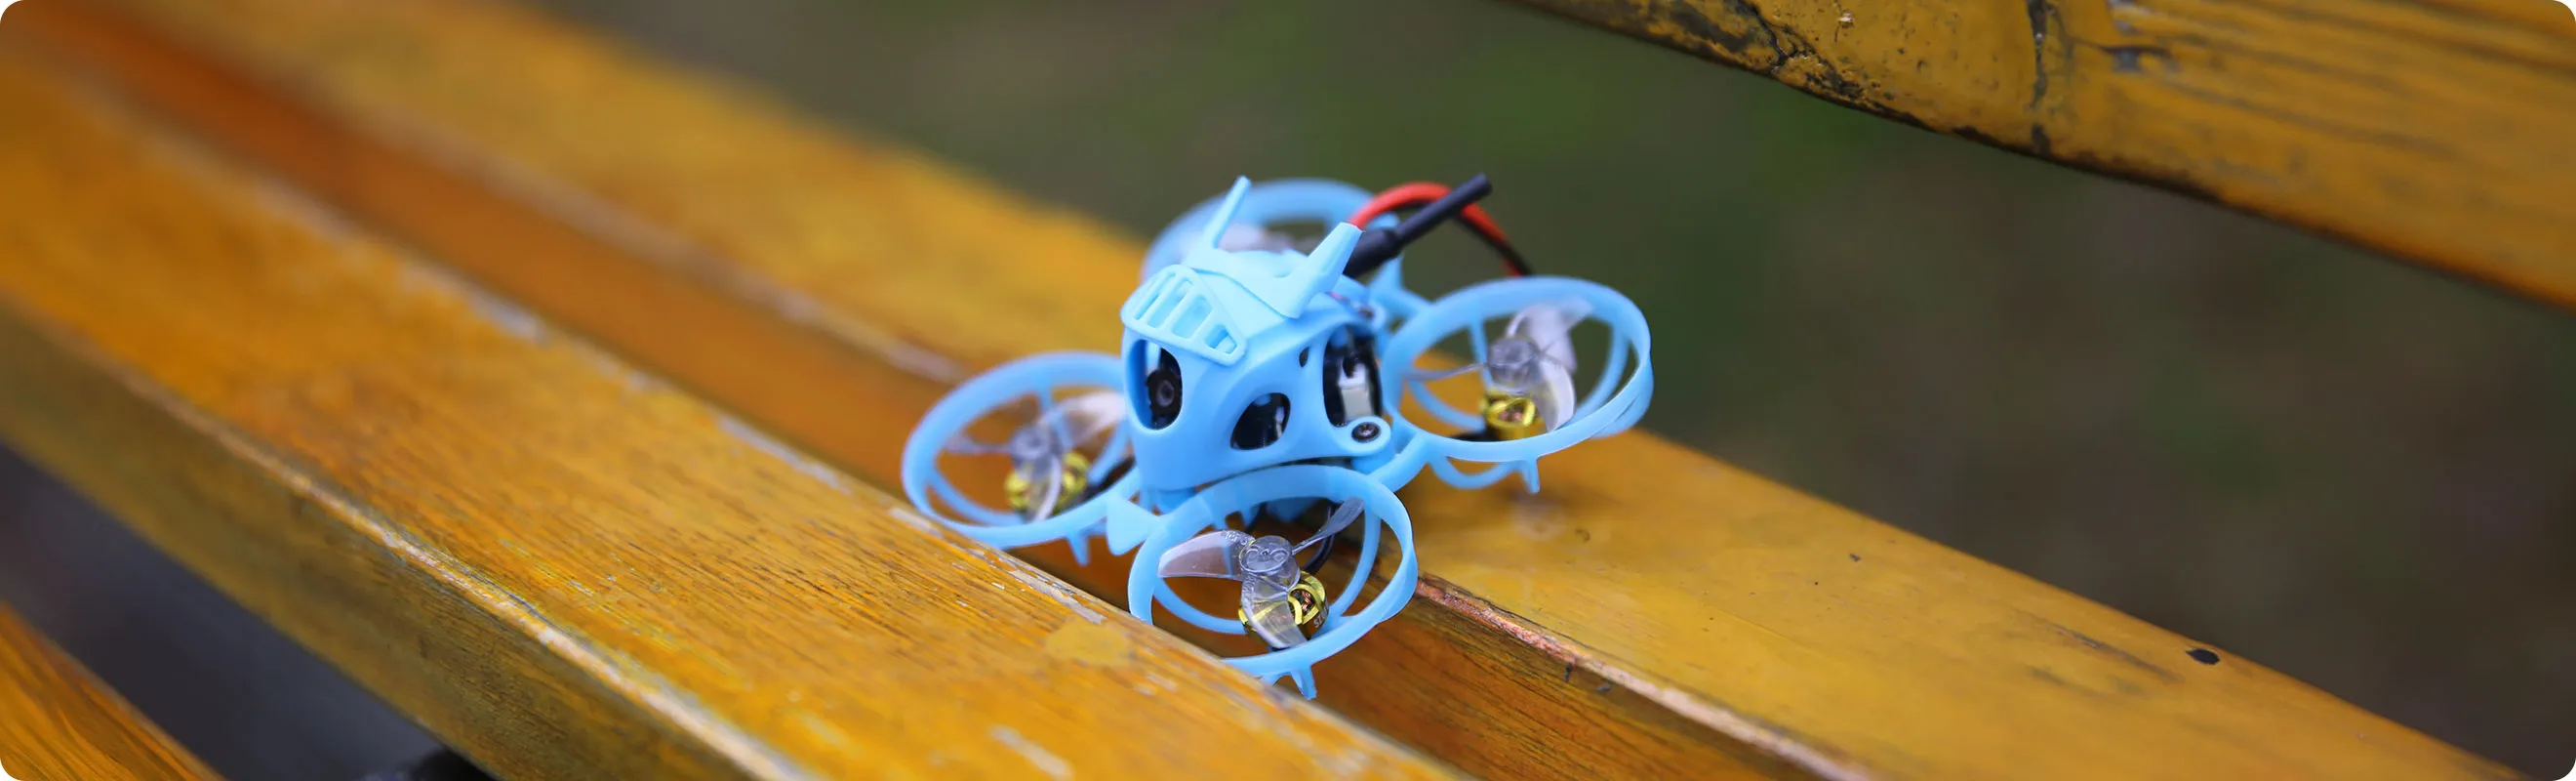 0802 drone motor with high maneuverability